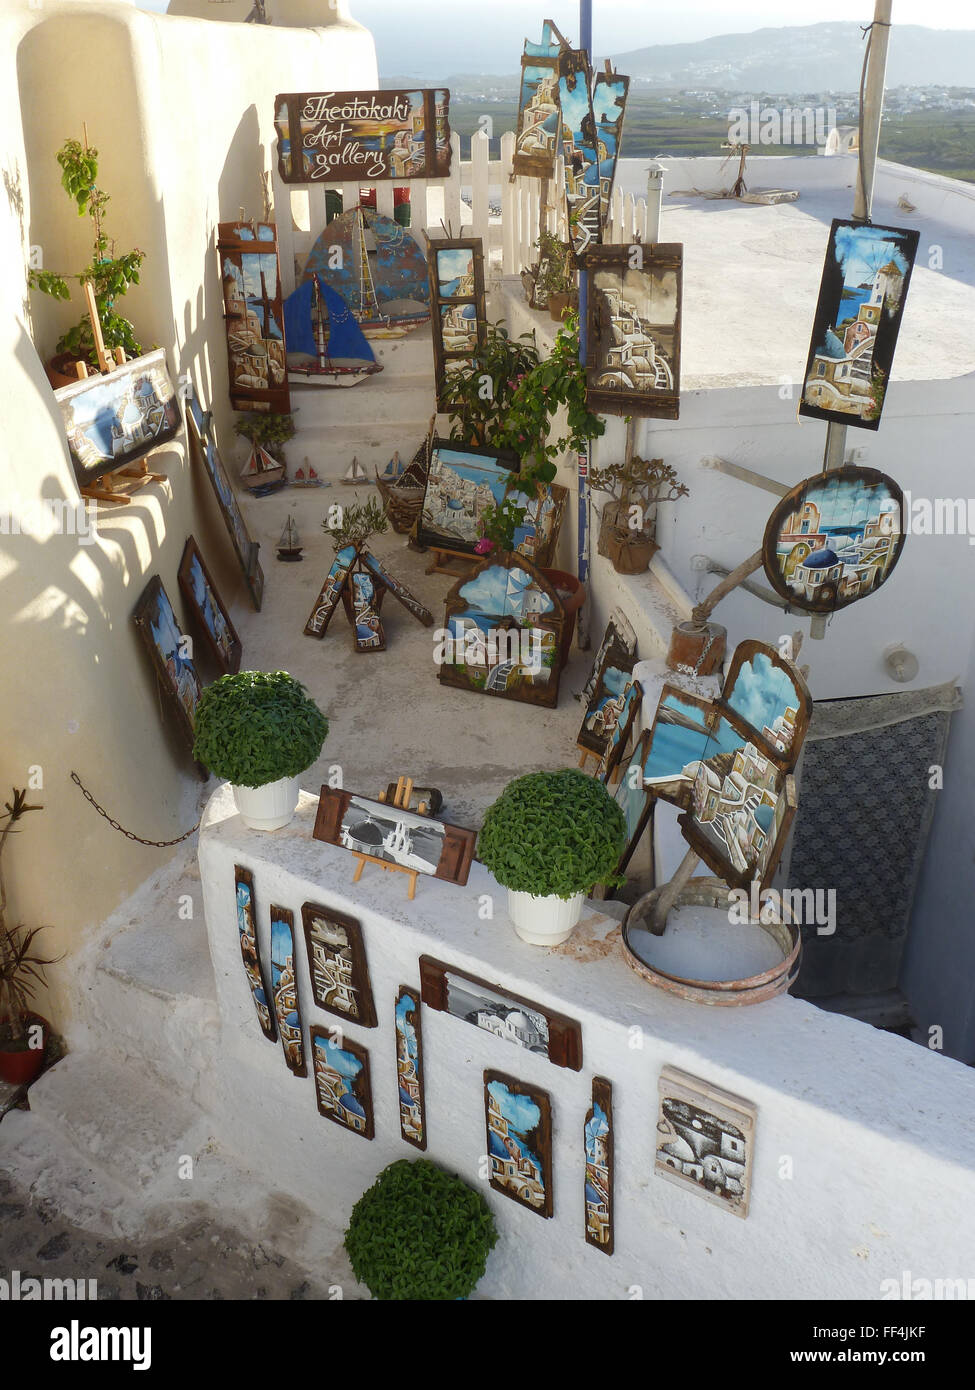 paintings for sale at oia village at santorini greece Stock Photo